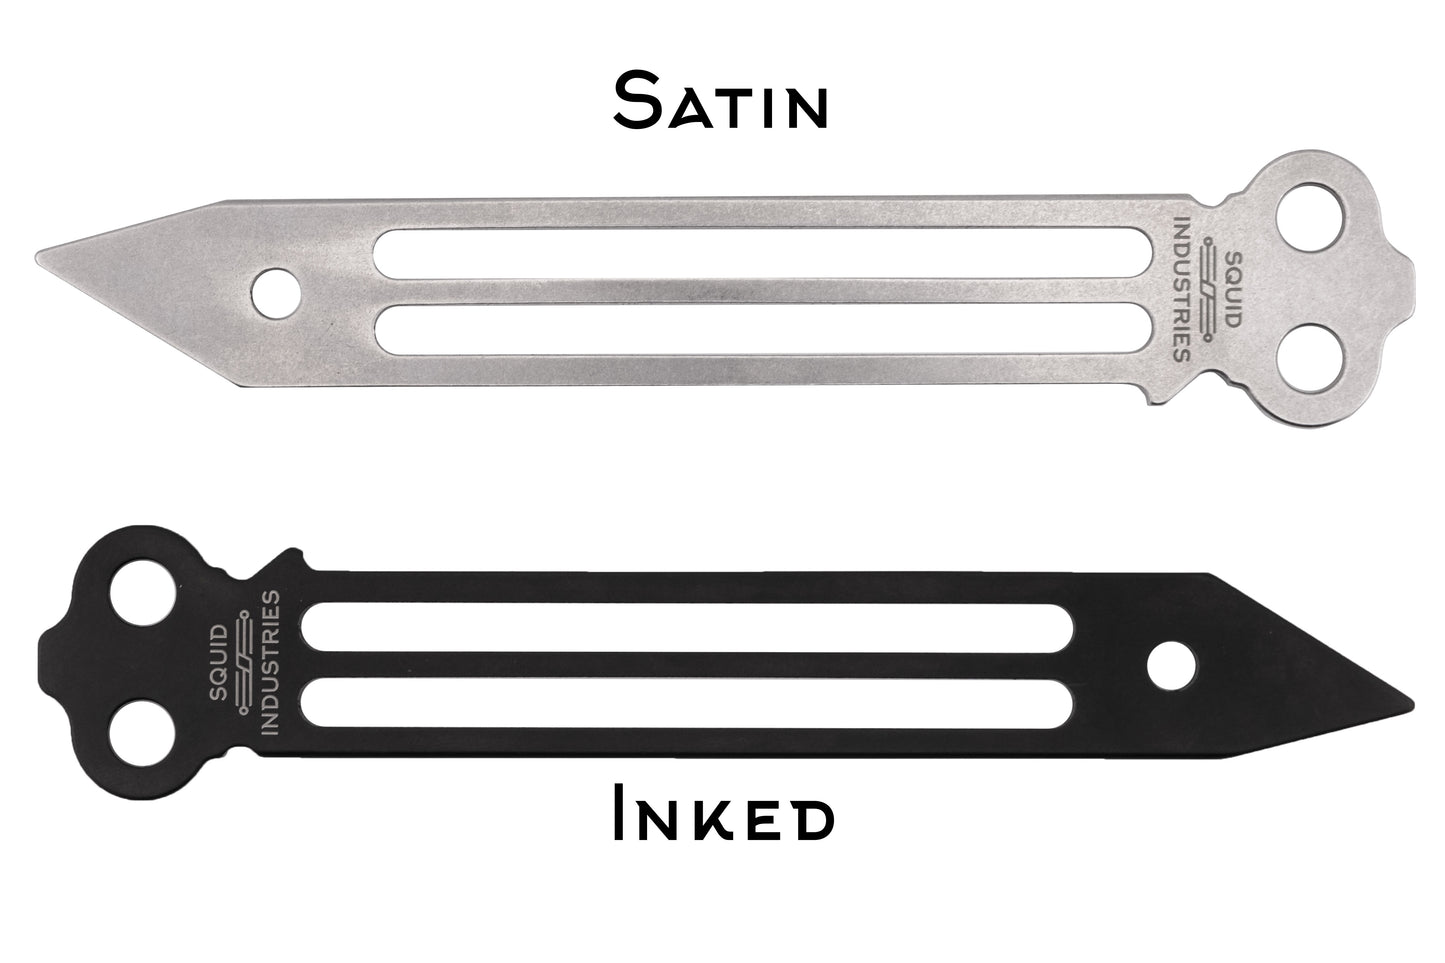 build your own squidtrainer blade options